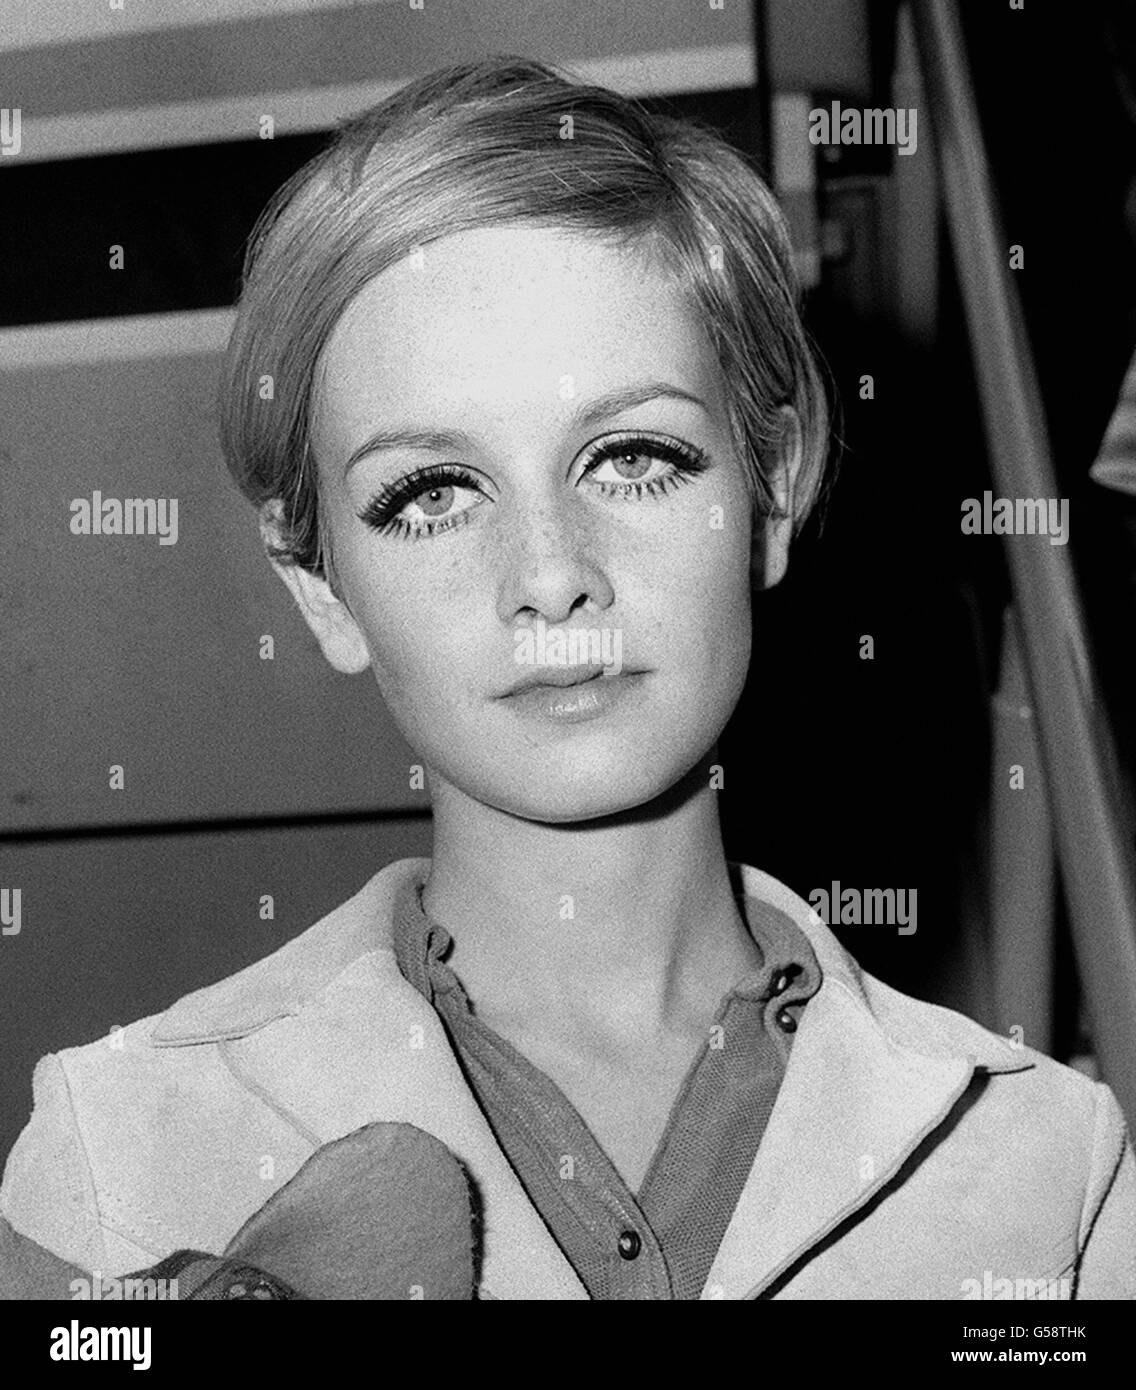 Fashion - Models - Twiggy - London. British model Twiggy, at Heathrow Airport, London before her journey to Tunisia. Stock Photo